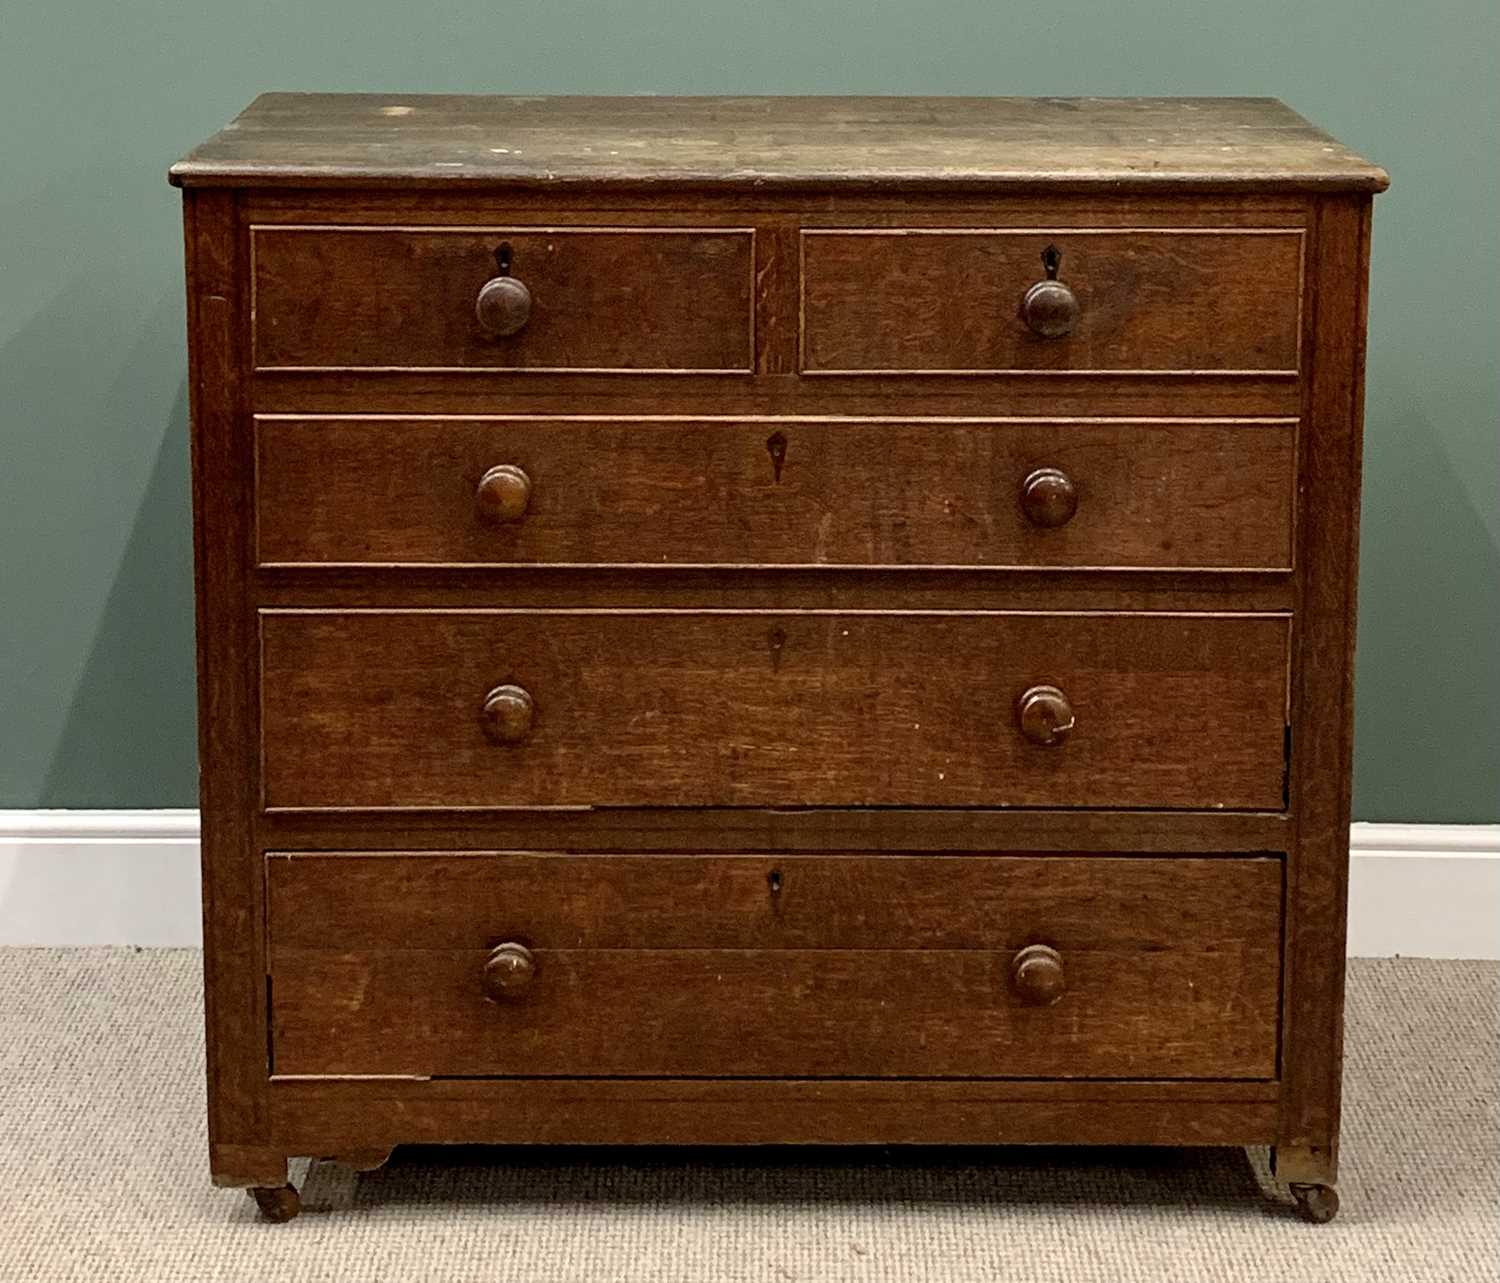 ANTIQUE OAK CHEST of two short over three long drawers with turned wooden knobs, on castors,